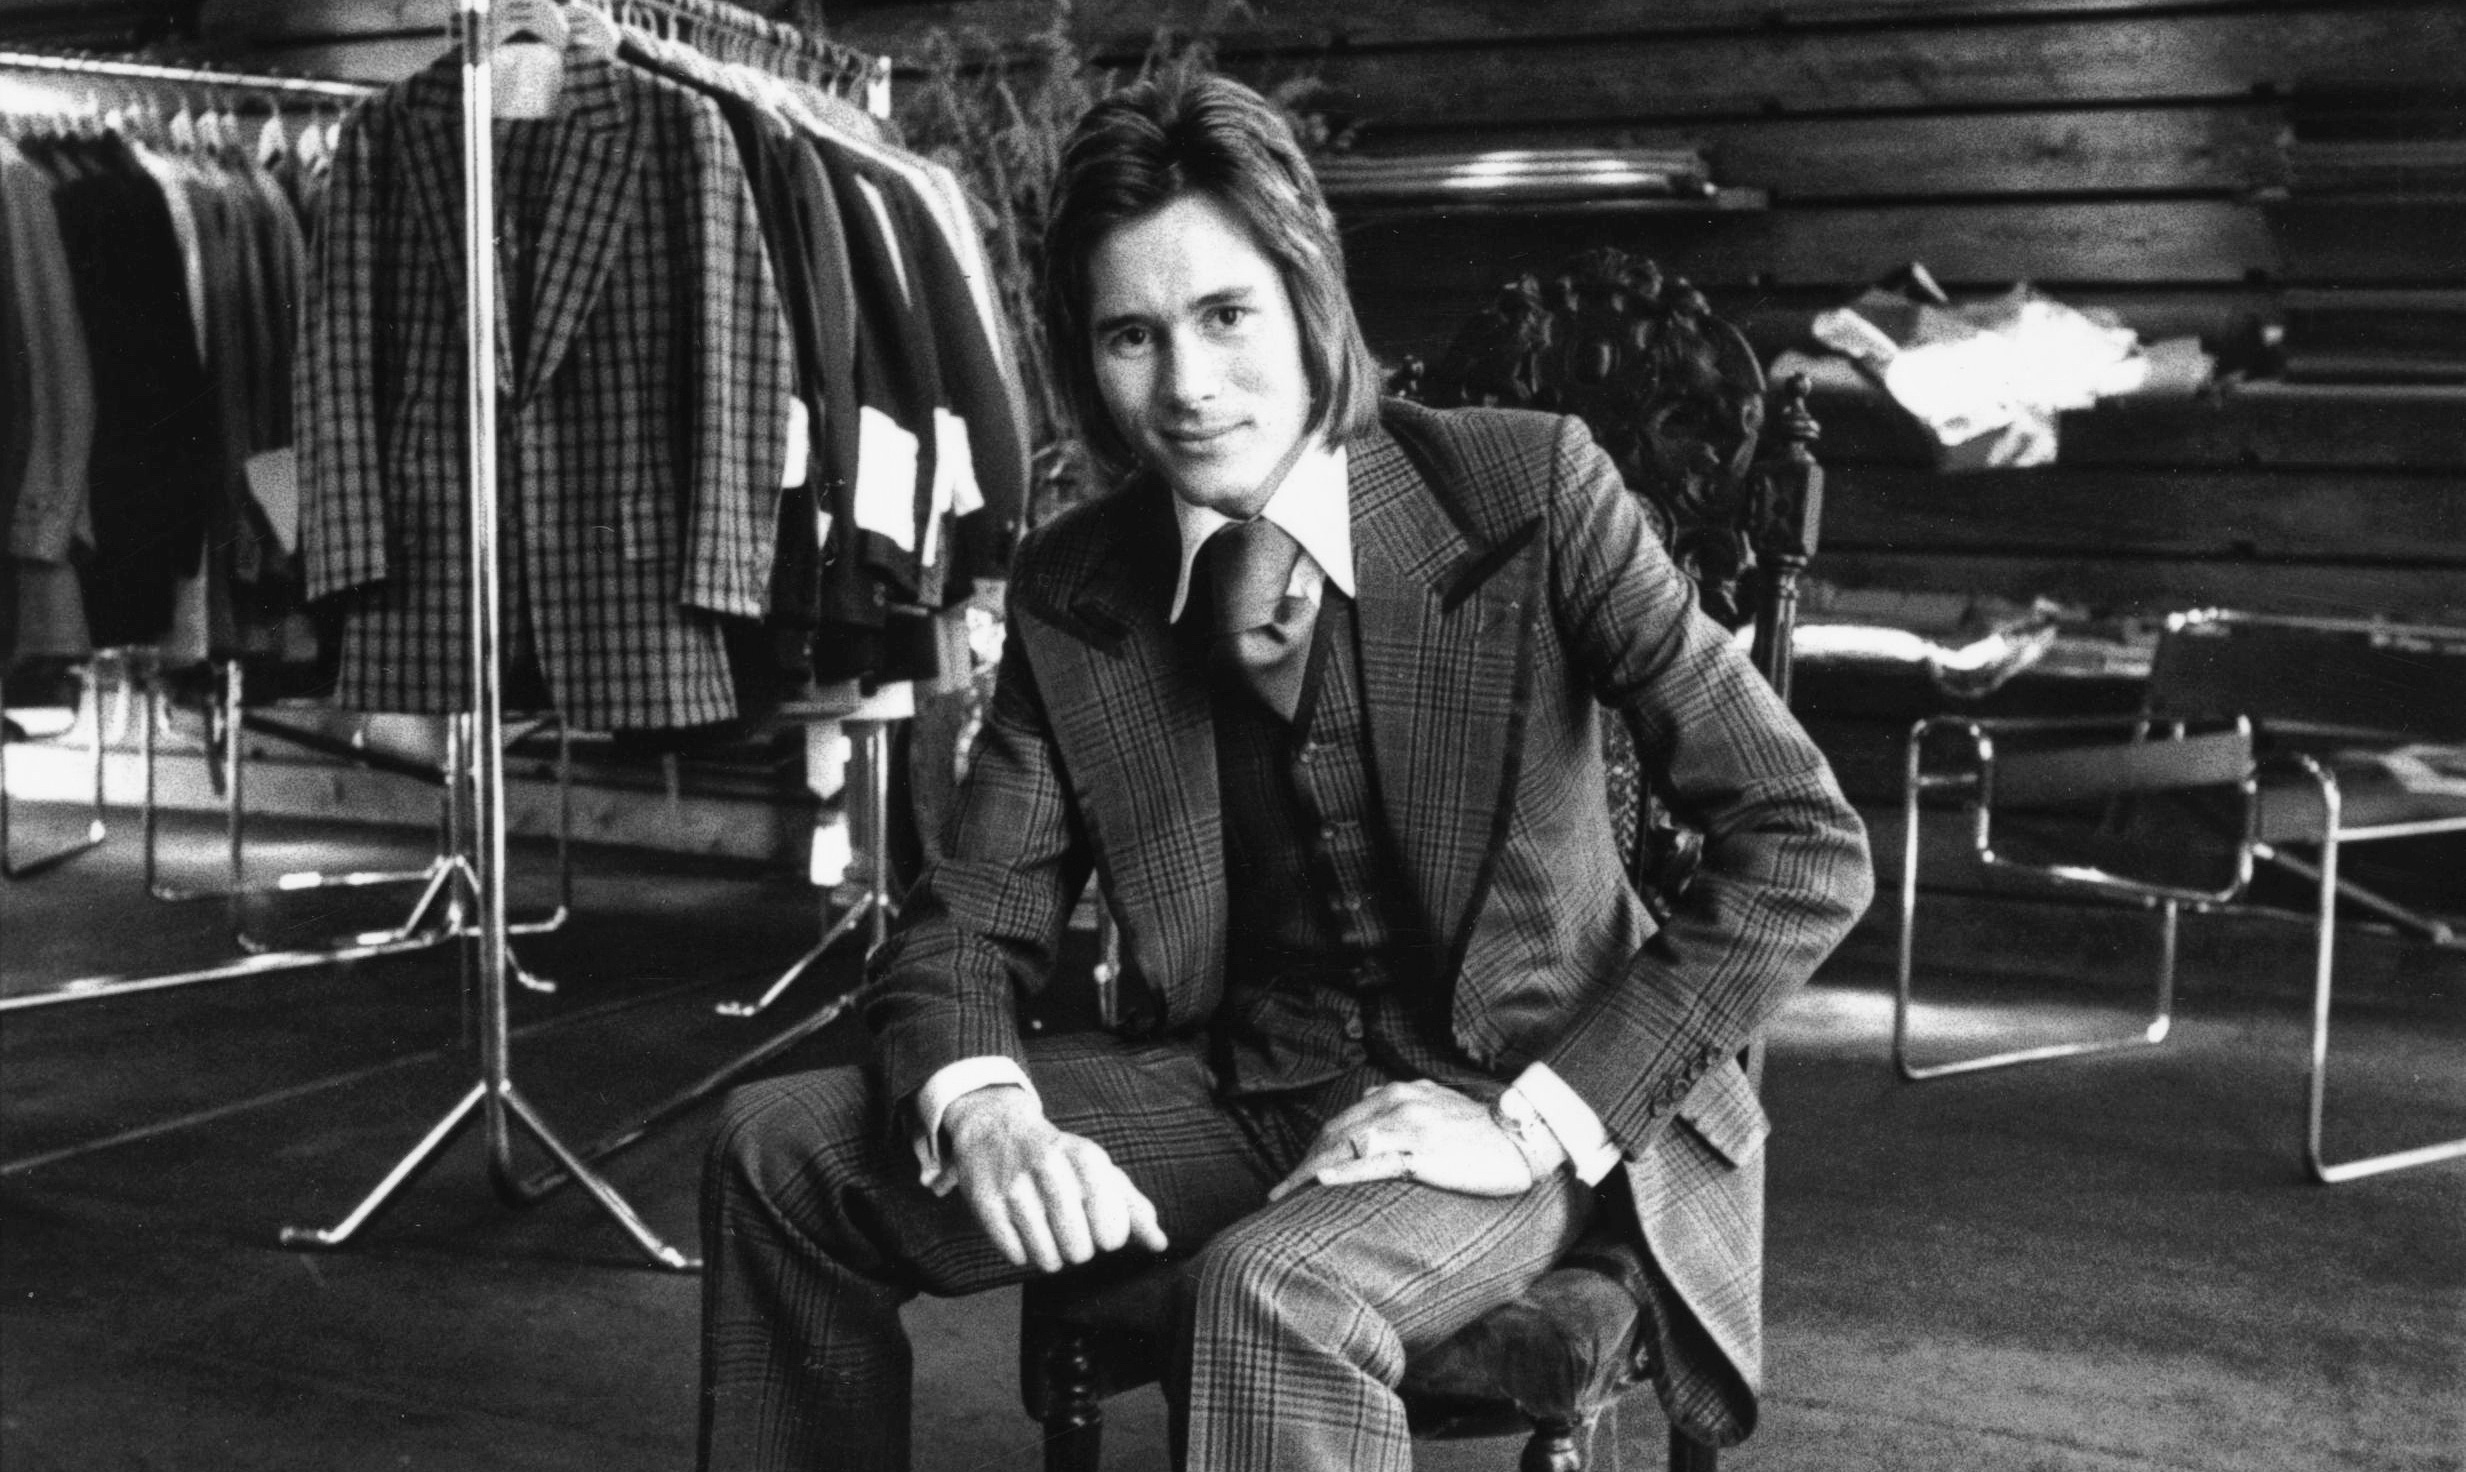 Savile Row's rebellious front-of-house man Tommy Nutter wearing heroically sized lapels in the early 70s.